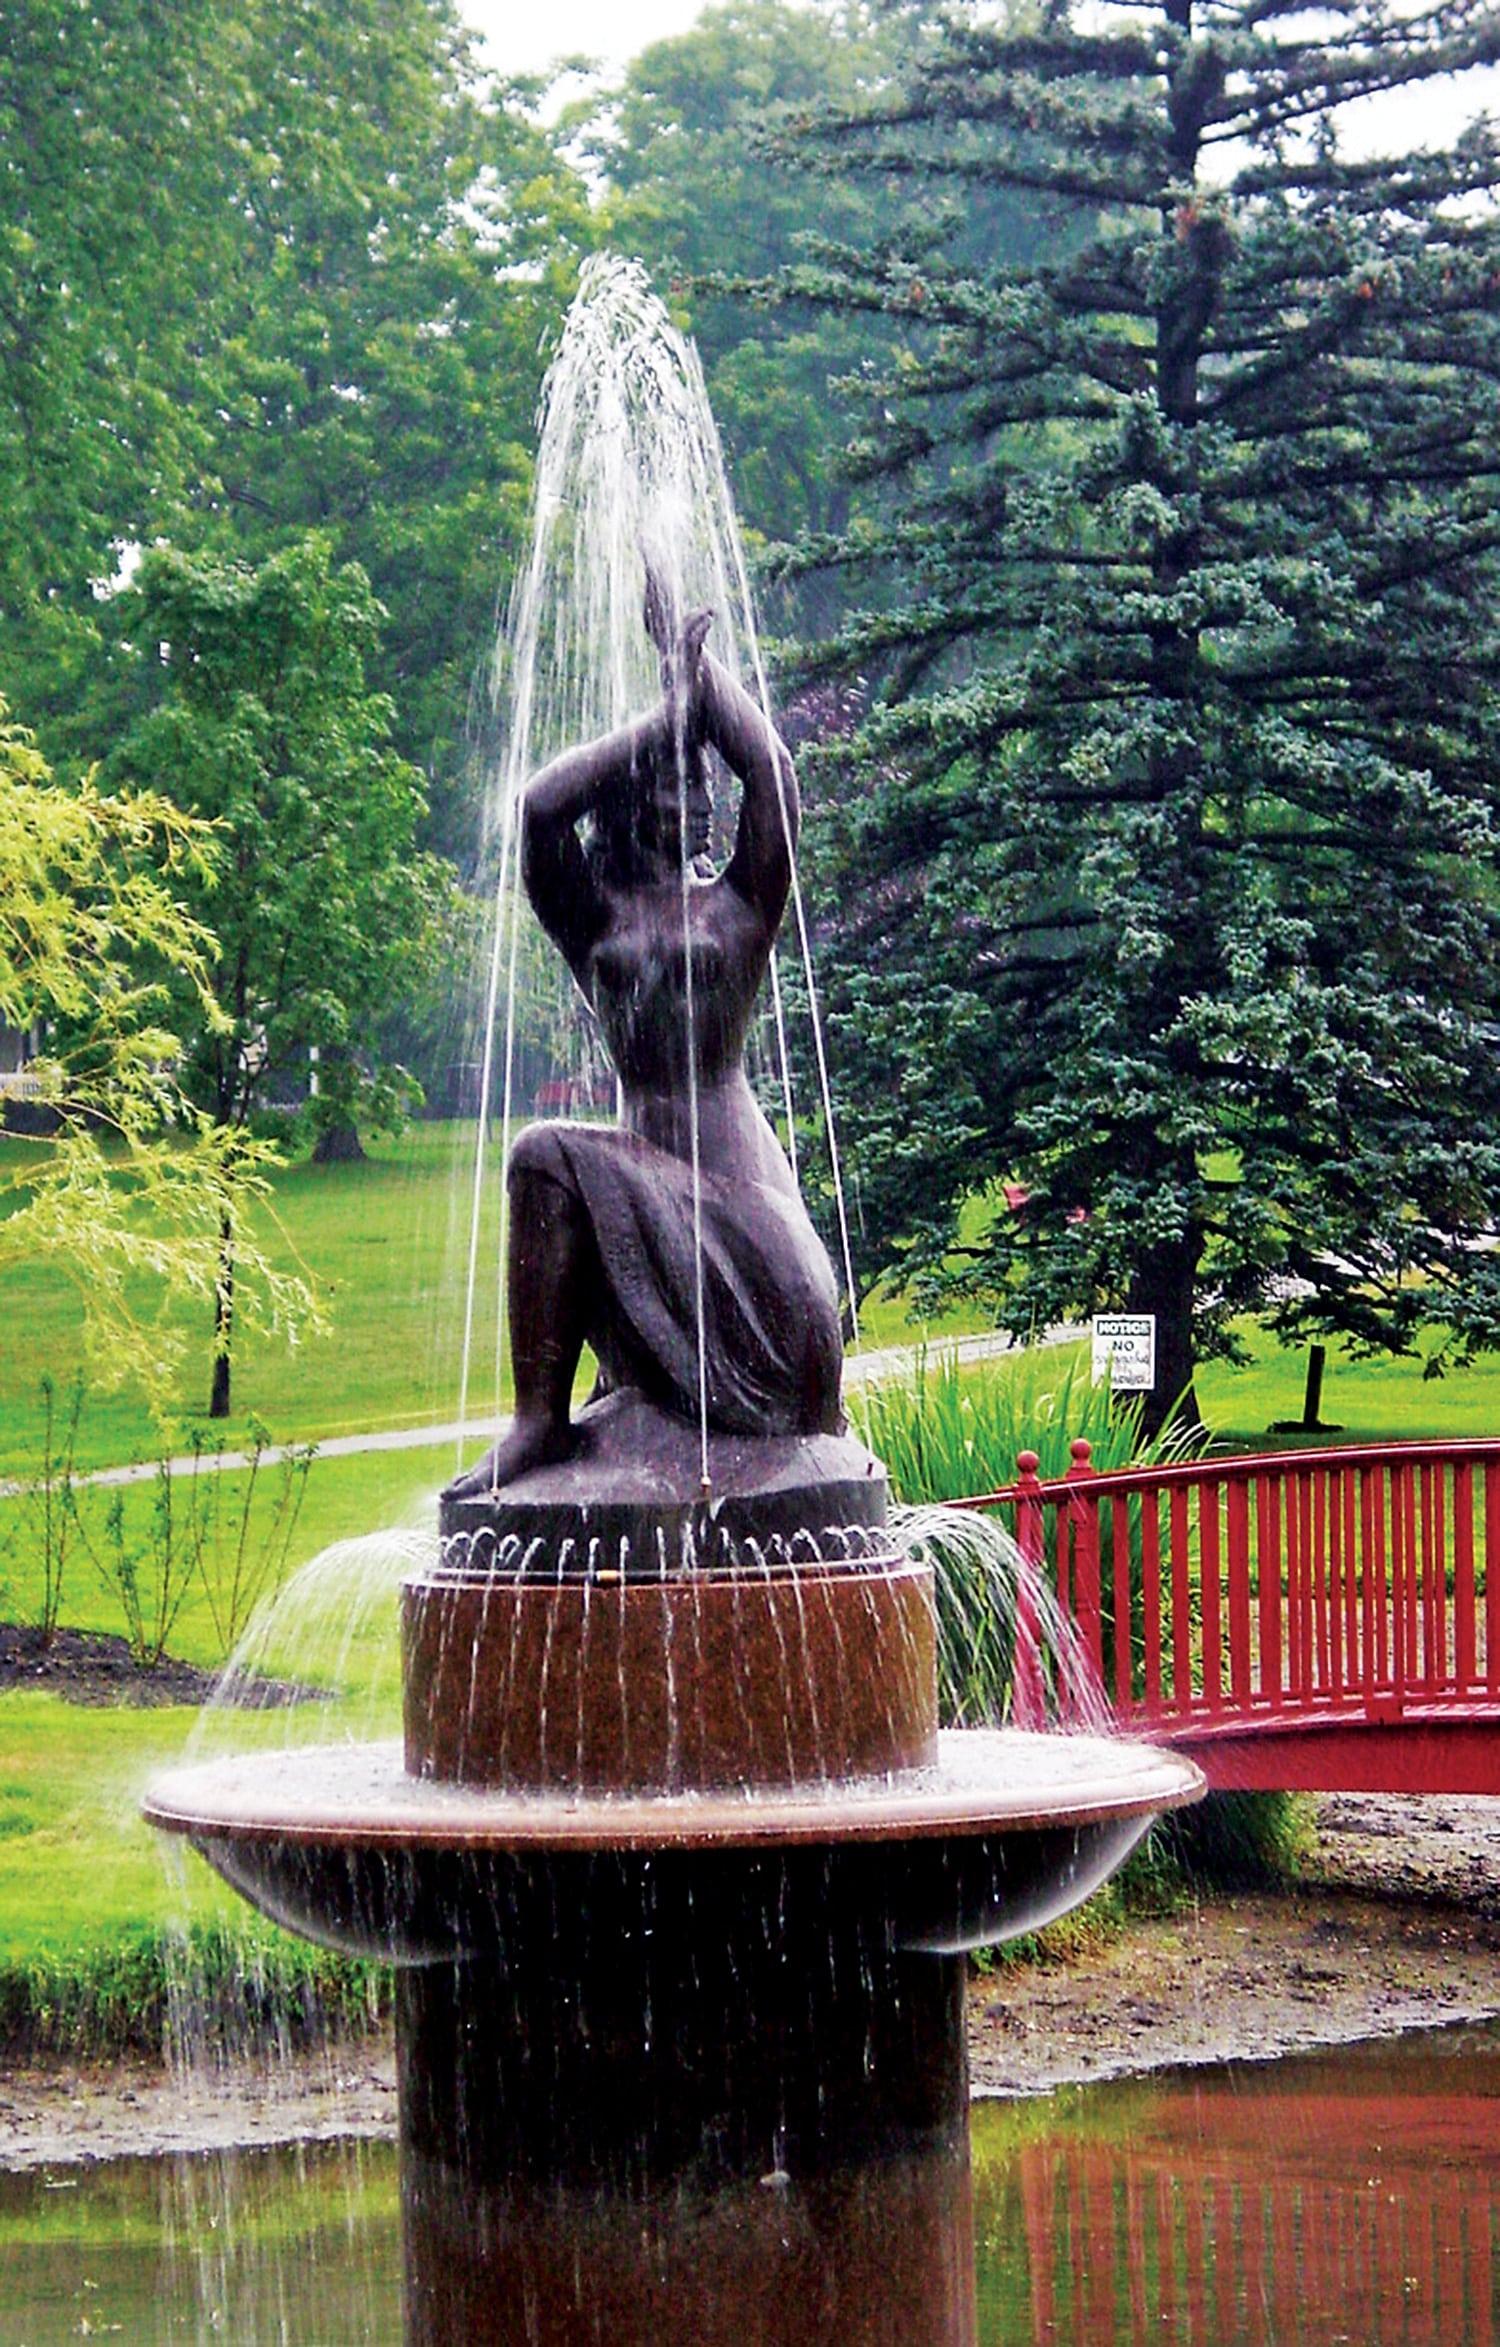 Bronze sculpture and fountain in the shape of a partially nude woman, resting on one knee and raising her arms above her head, set in a park with trees and a bridge in the background. 